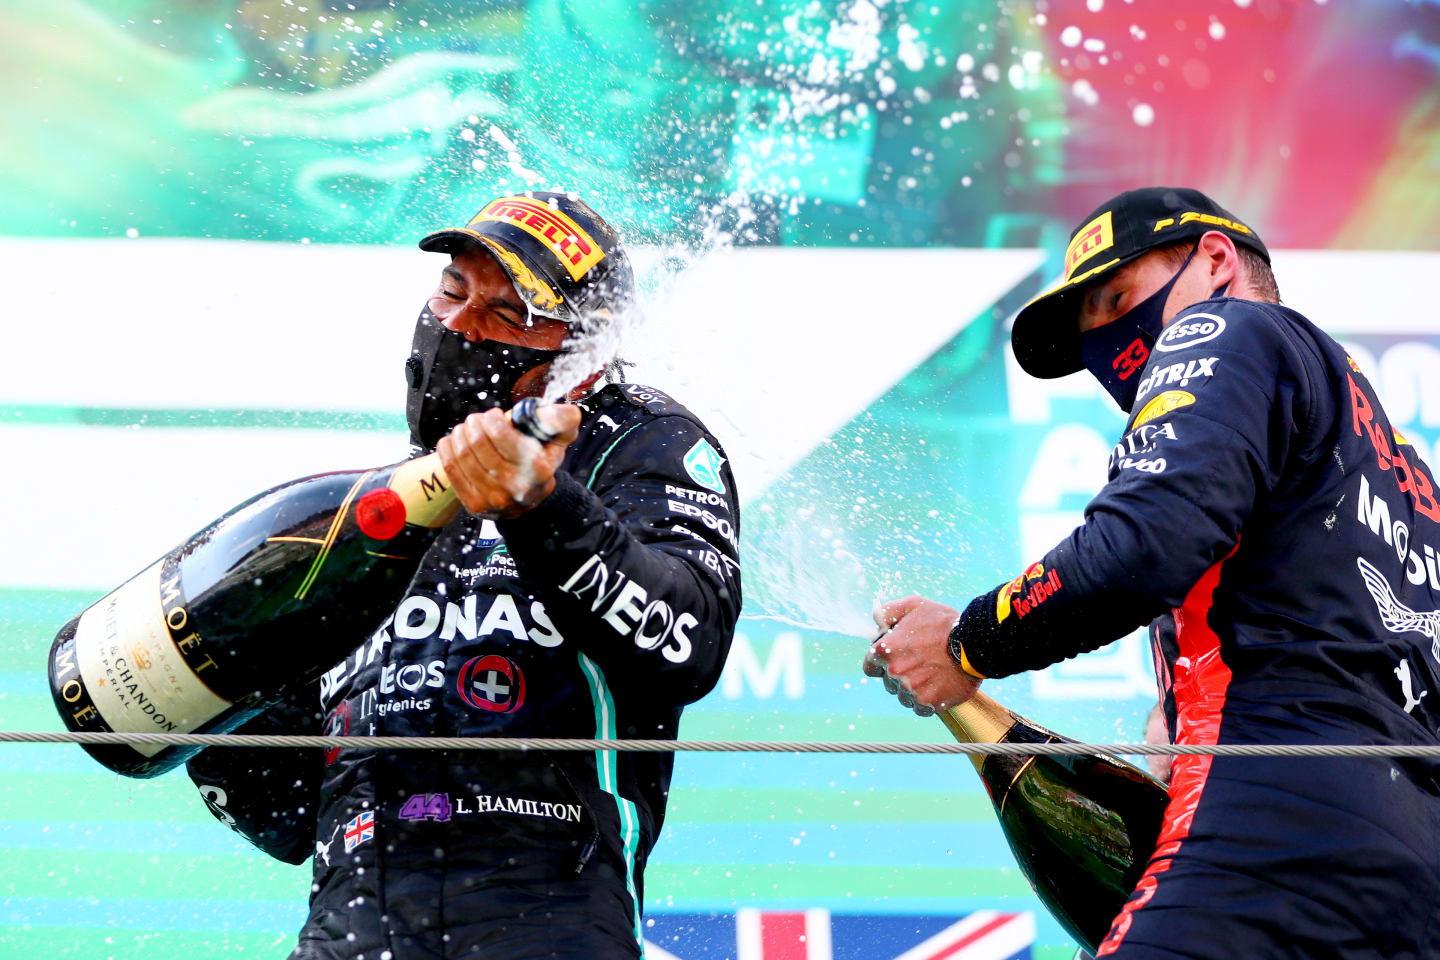 BARCELONA, SPAIN - AUGUST 16: Race winner Lewis Hamilton of Great Britain and Mercedes GP and